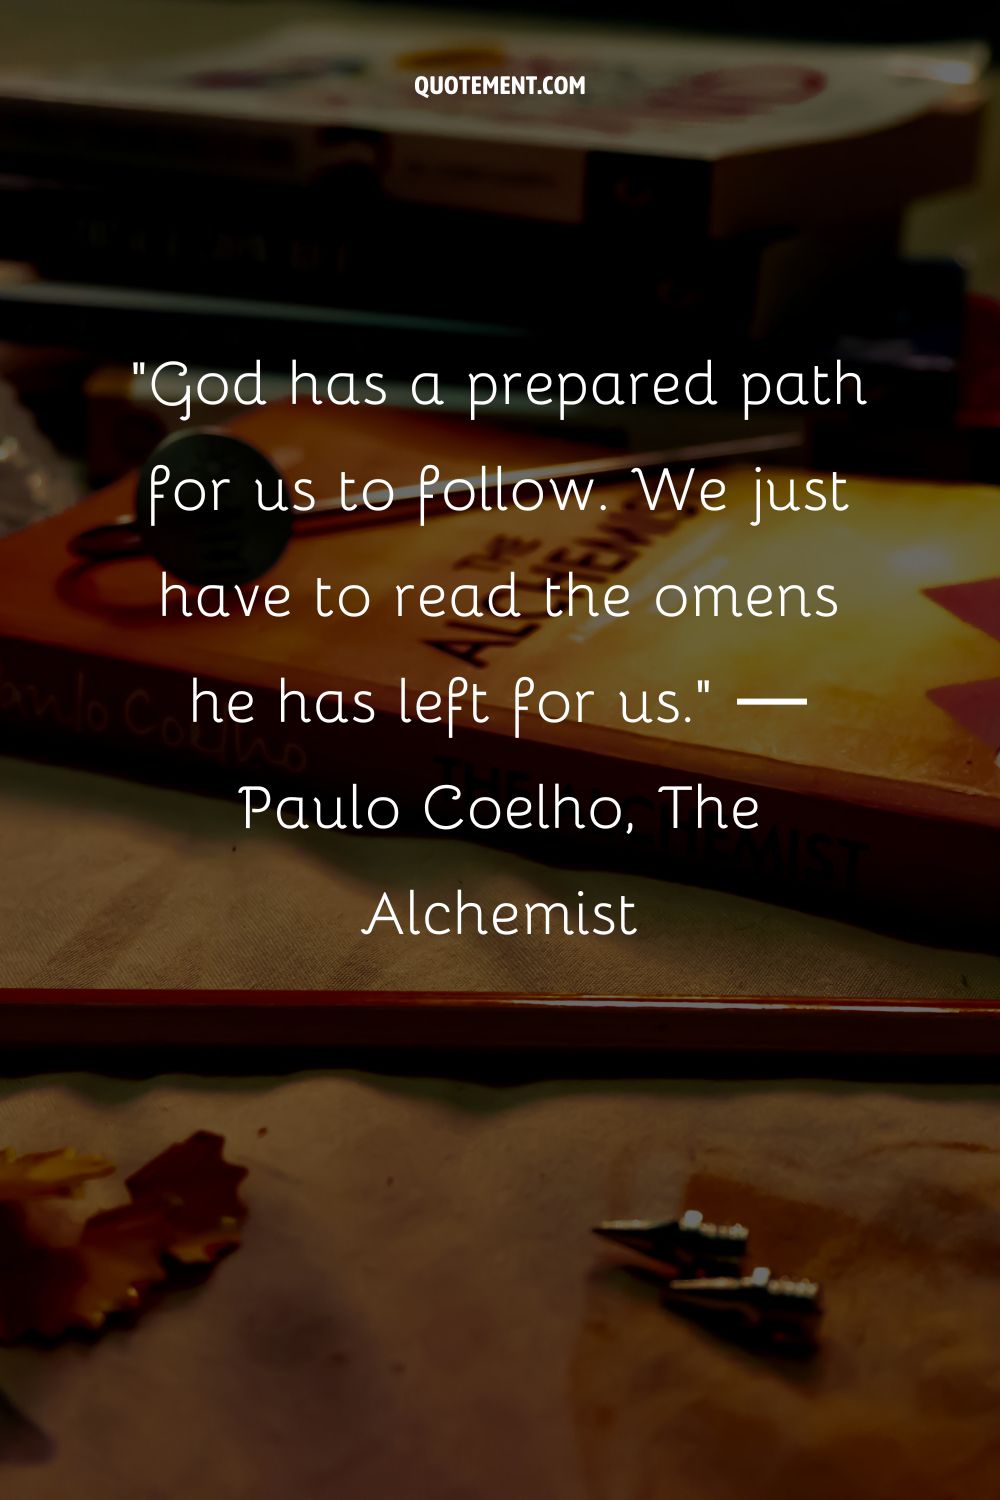 God has a prepared path for us to follow. We just have to read the omens he has left for us